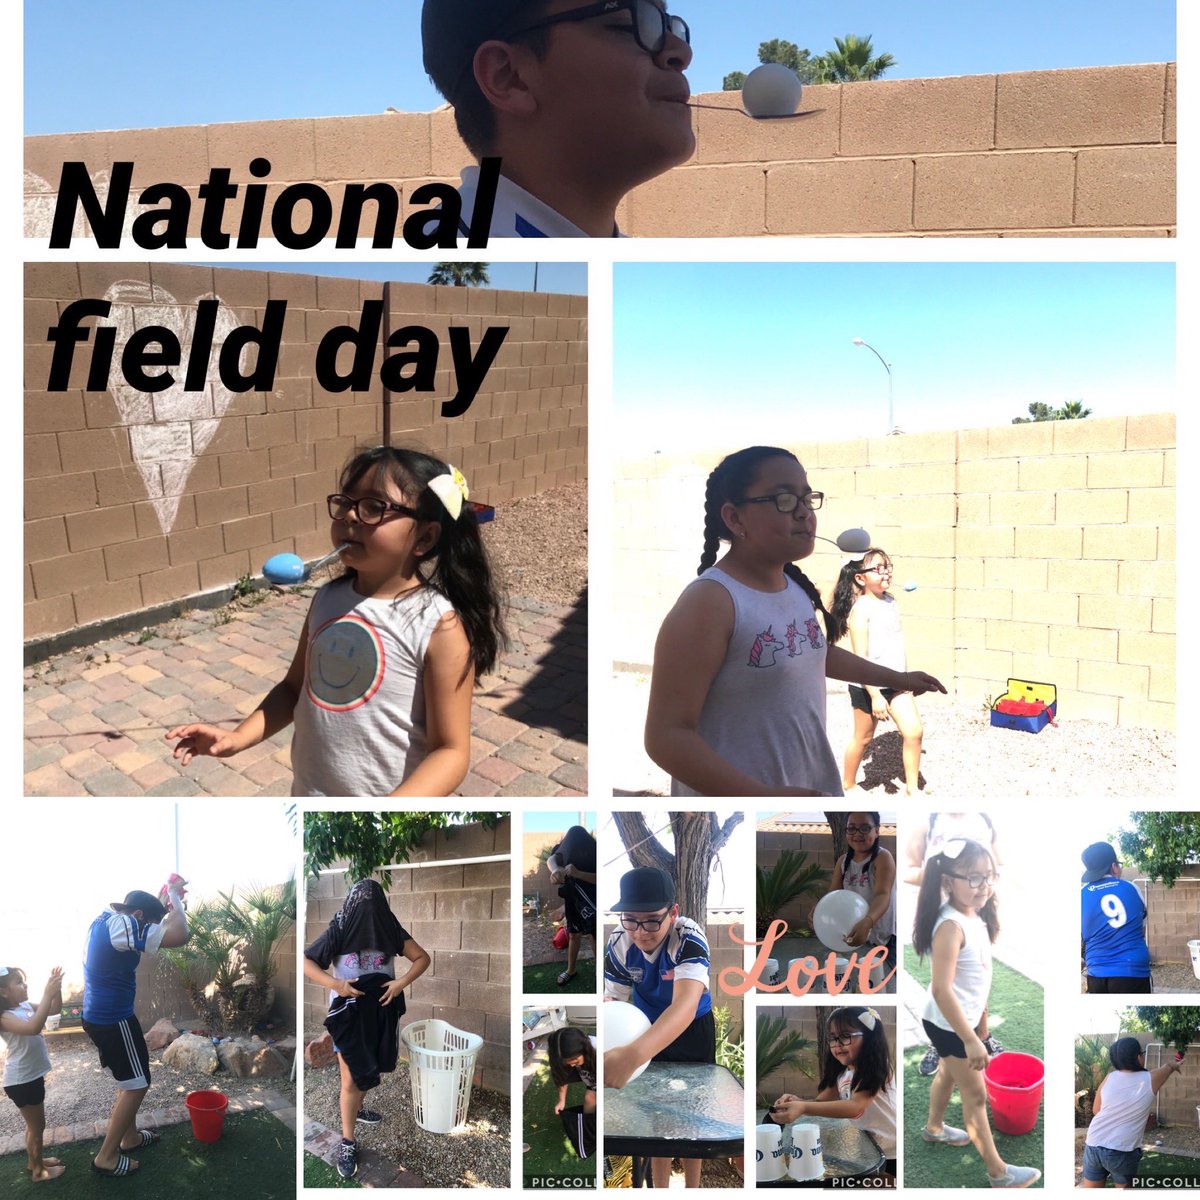 Yesterday, May 8th was National Field Day and the wonderful Garza Family Celebrated in full force!! Thank you for sharing, We Are Stronger Together @HeardESMagnet